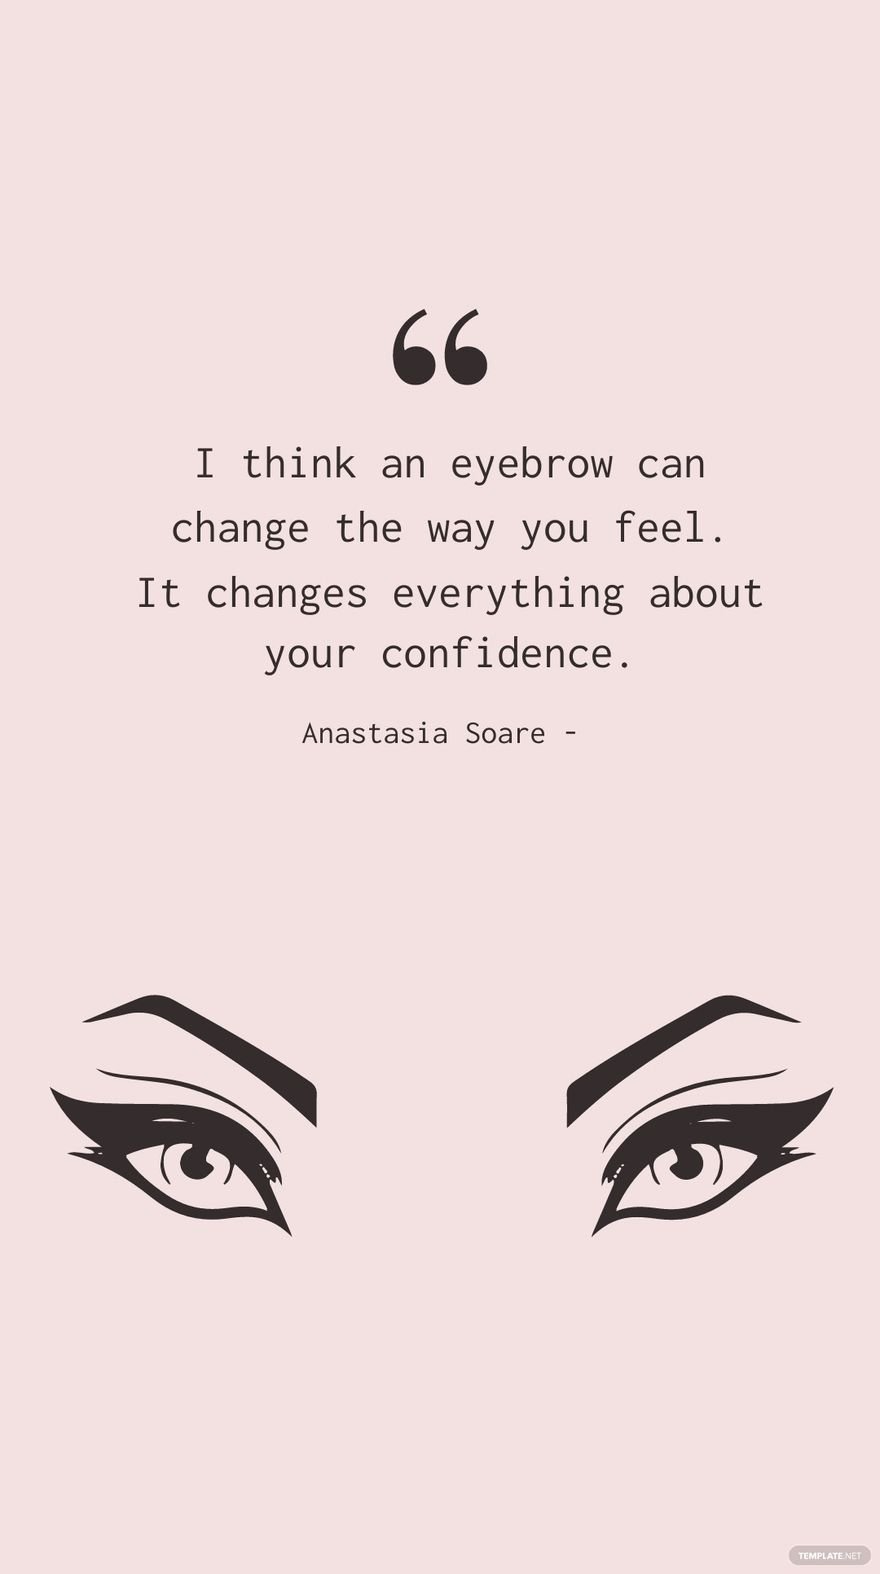 Anastasia Soare - I think an eyebrow can change the way you feel. It changes everything about your confidence.